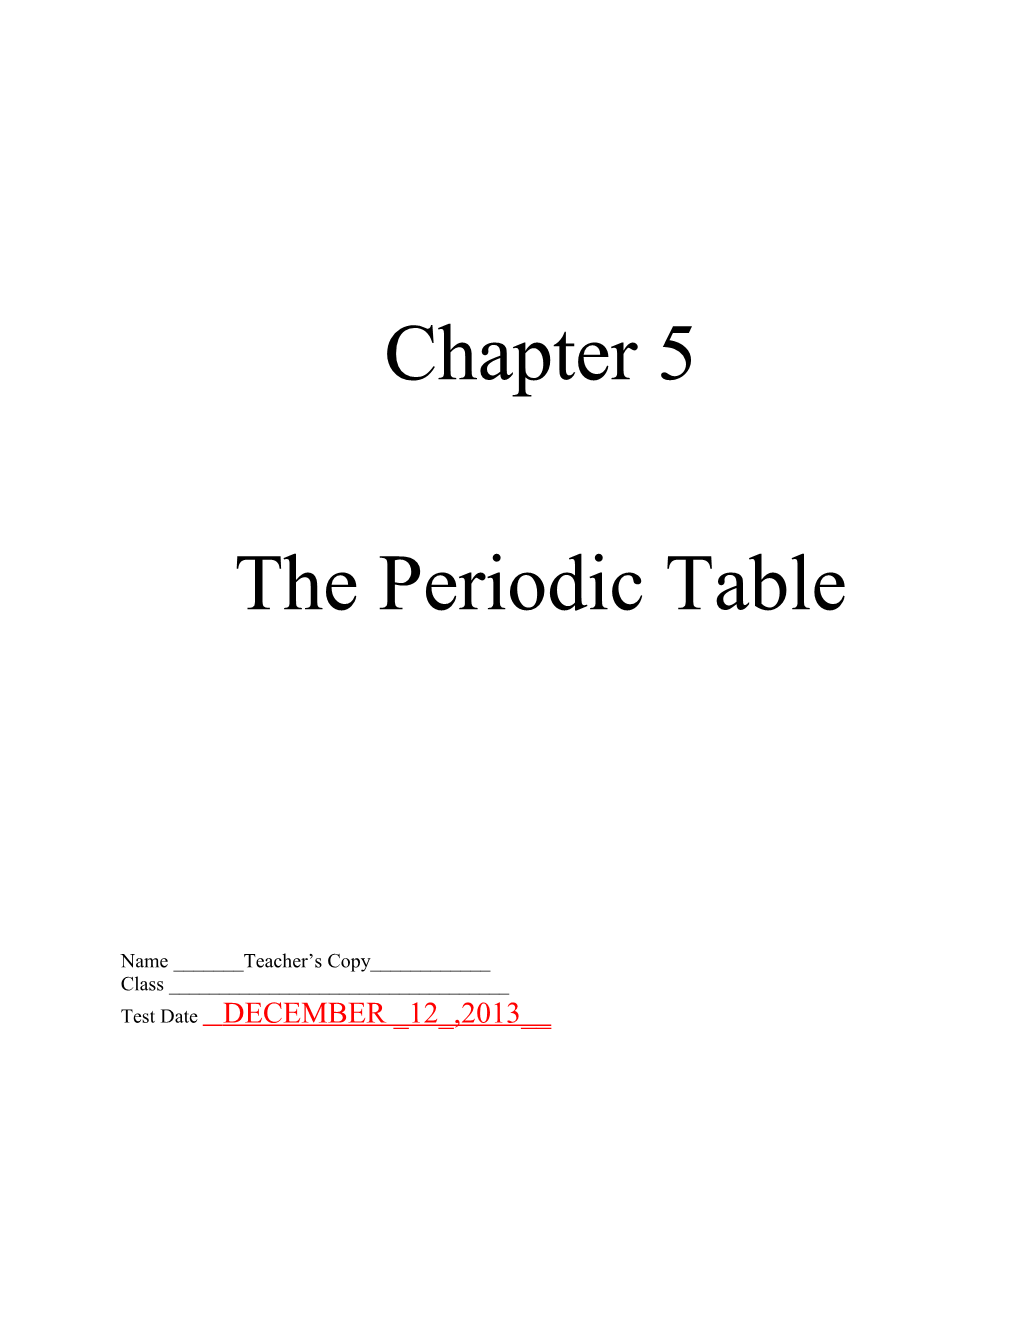 Chapter 5 the Periodic Table Outline